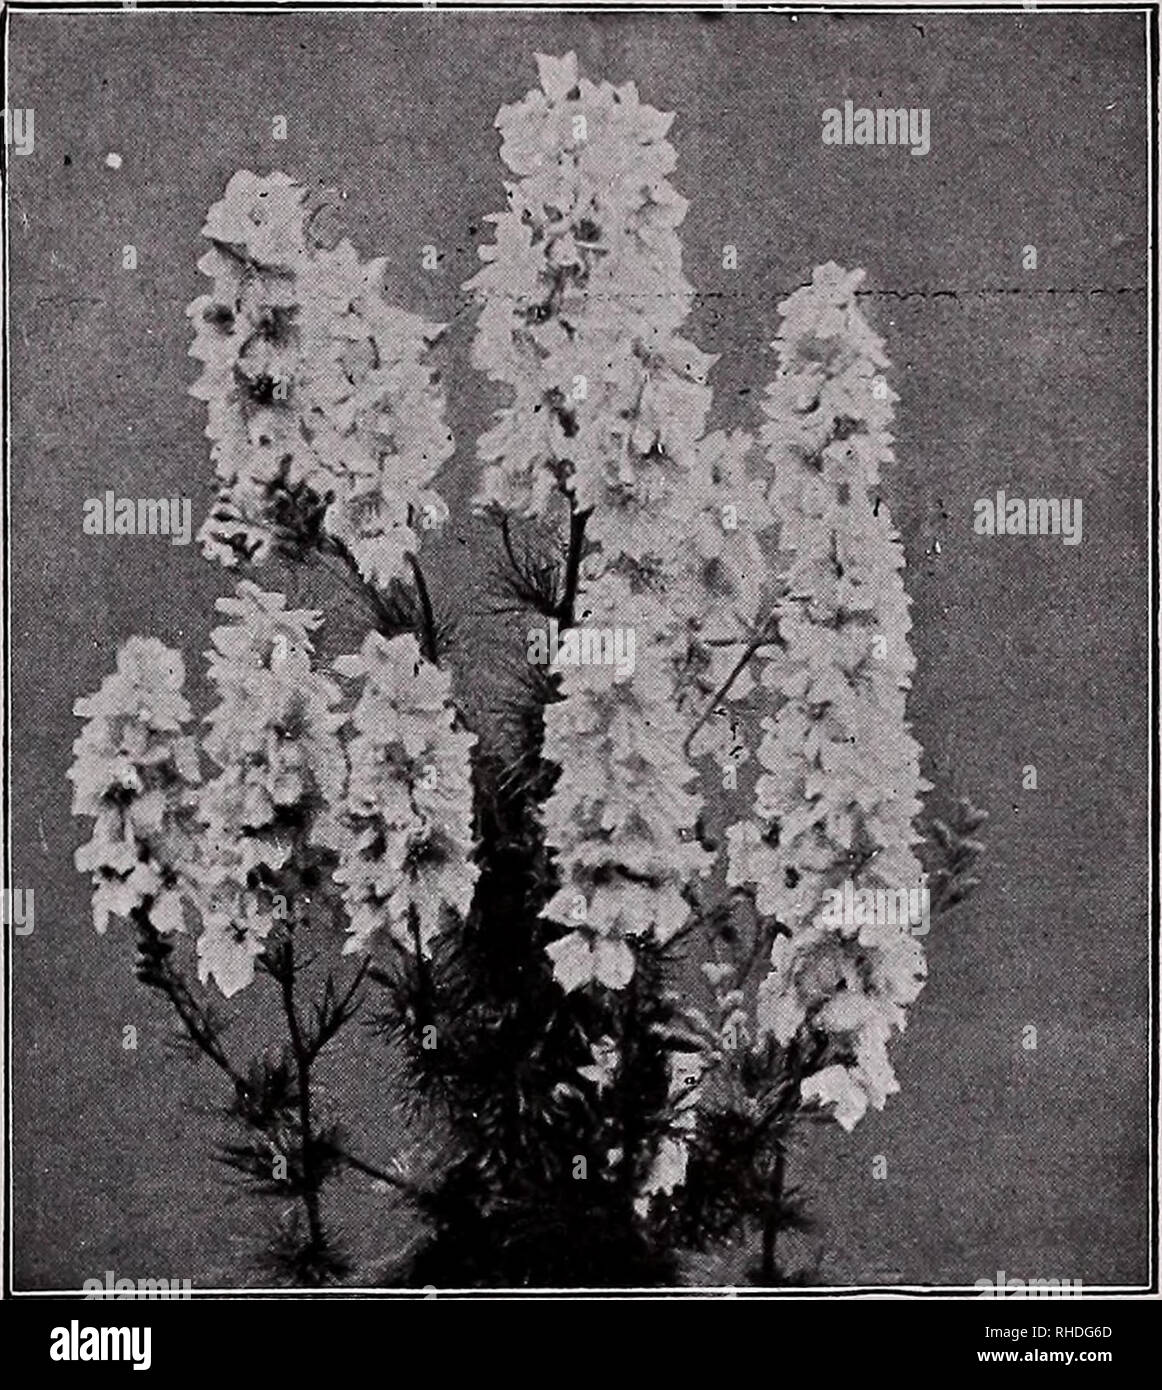 . Book for florists. Flowers Seeds Catalogs; Bulbs (Plants) Seedlings Catalogs; Vegetables Seeds Catalogs; Trees Seeds Catalogs; Horticulture Equipment and supplies Catalogs. VAUGHAN'S SEED STORE, CHICAGO AND NEW YORK, BOOK FOR FLORISTS 11 Chinese Forget-Me-Not Cynoglossum Amabile. A lovely plant 18 to 24 inches tall, with flowers of a true Forget-me-not blue. May be grown either outside or under glass. Trade pkt. Oz. Makes wonderful cut flower $0 10 $0.40 Cineraria Martima Candidissima, for bedding. Martima Diamond. Leaves pure white .15 .15 .40 .50 Clarkia Elegans fl. pi. Double Appleblossom Stock Photo